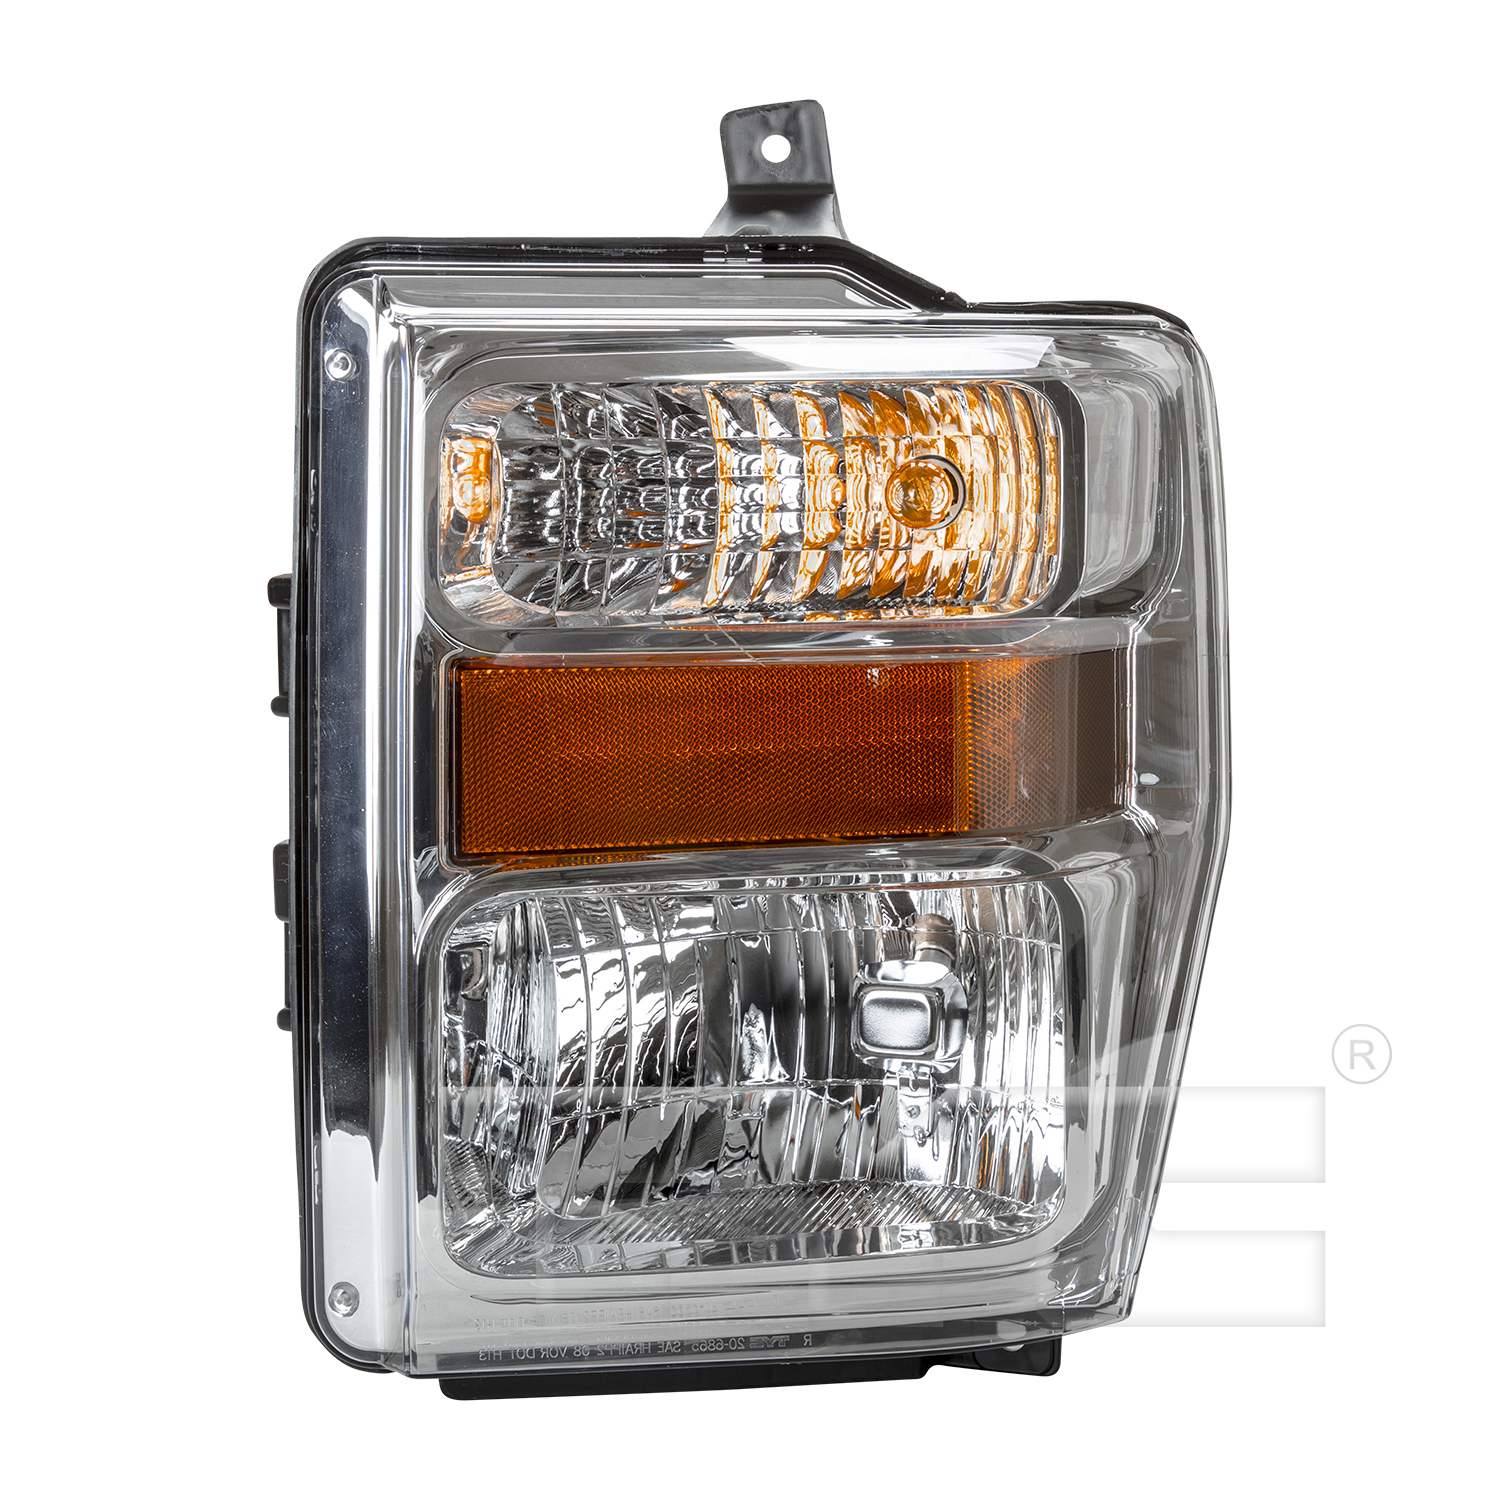 Aftermarket HEADLIGHTS for FORD - F-350 SUPER DUTY, F-350 SUPER DUTY,08-10,LT Headlamp assy composite